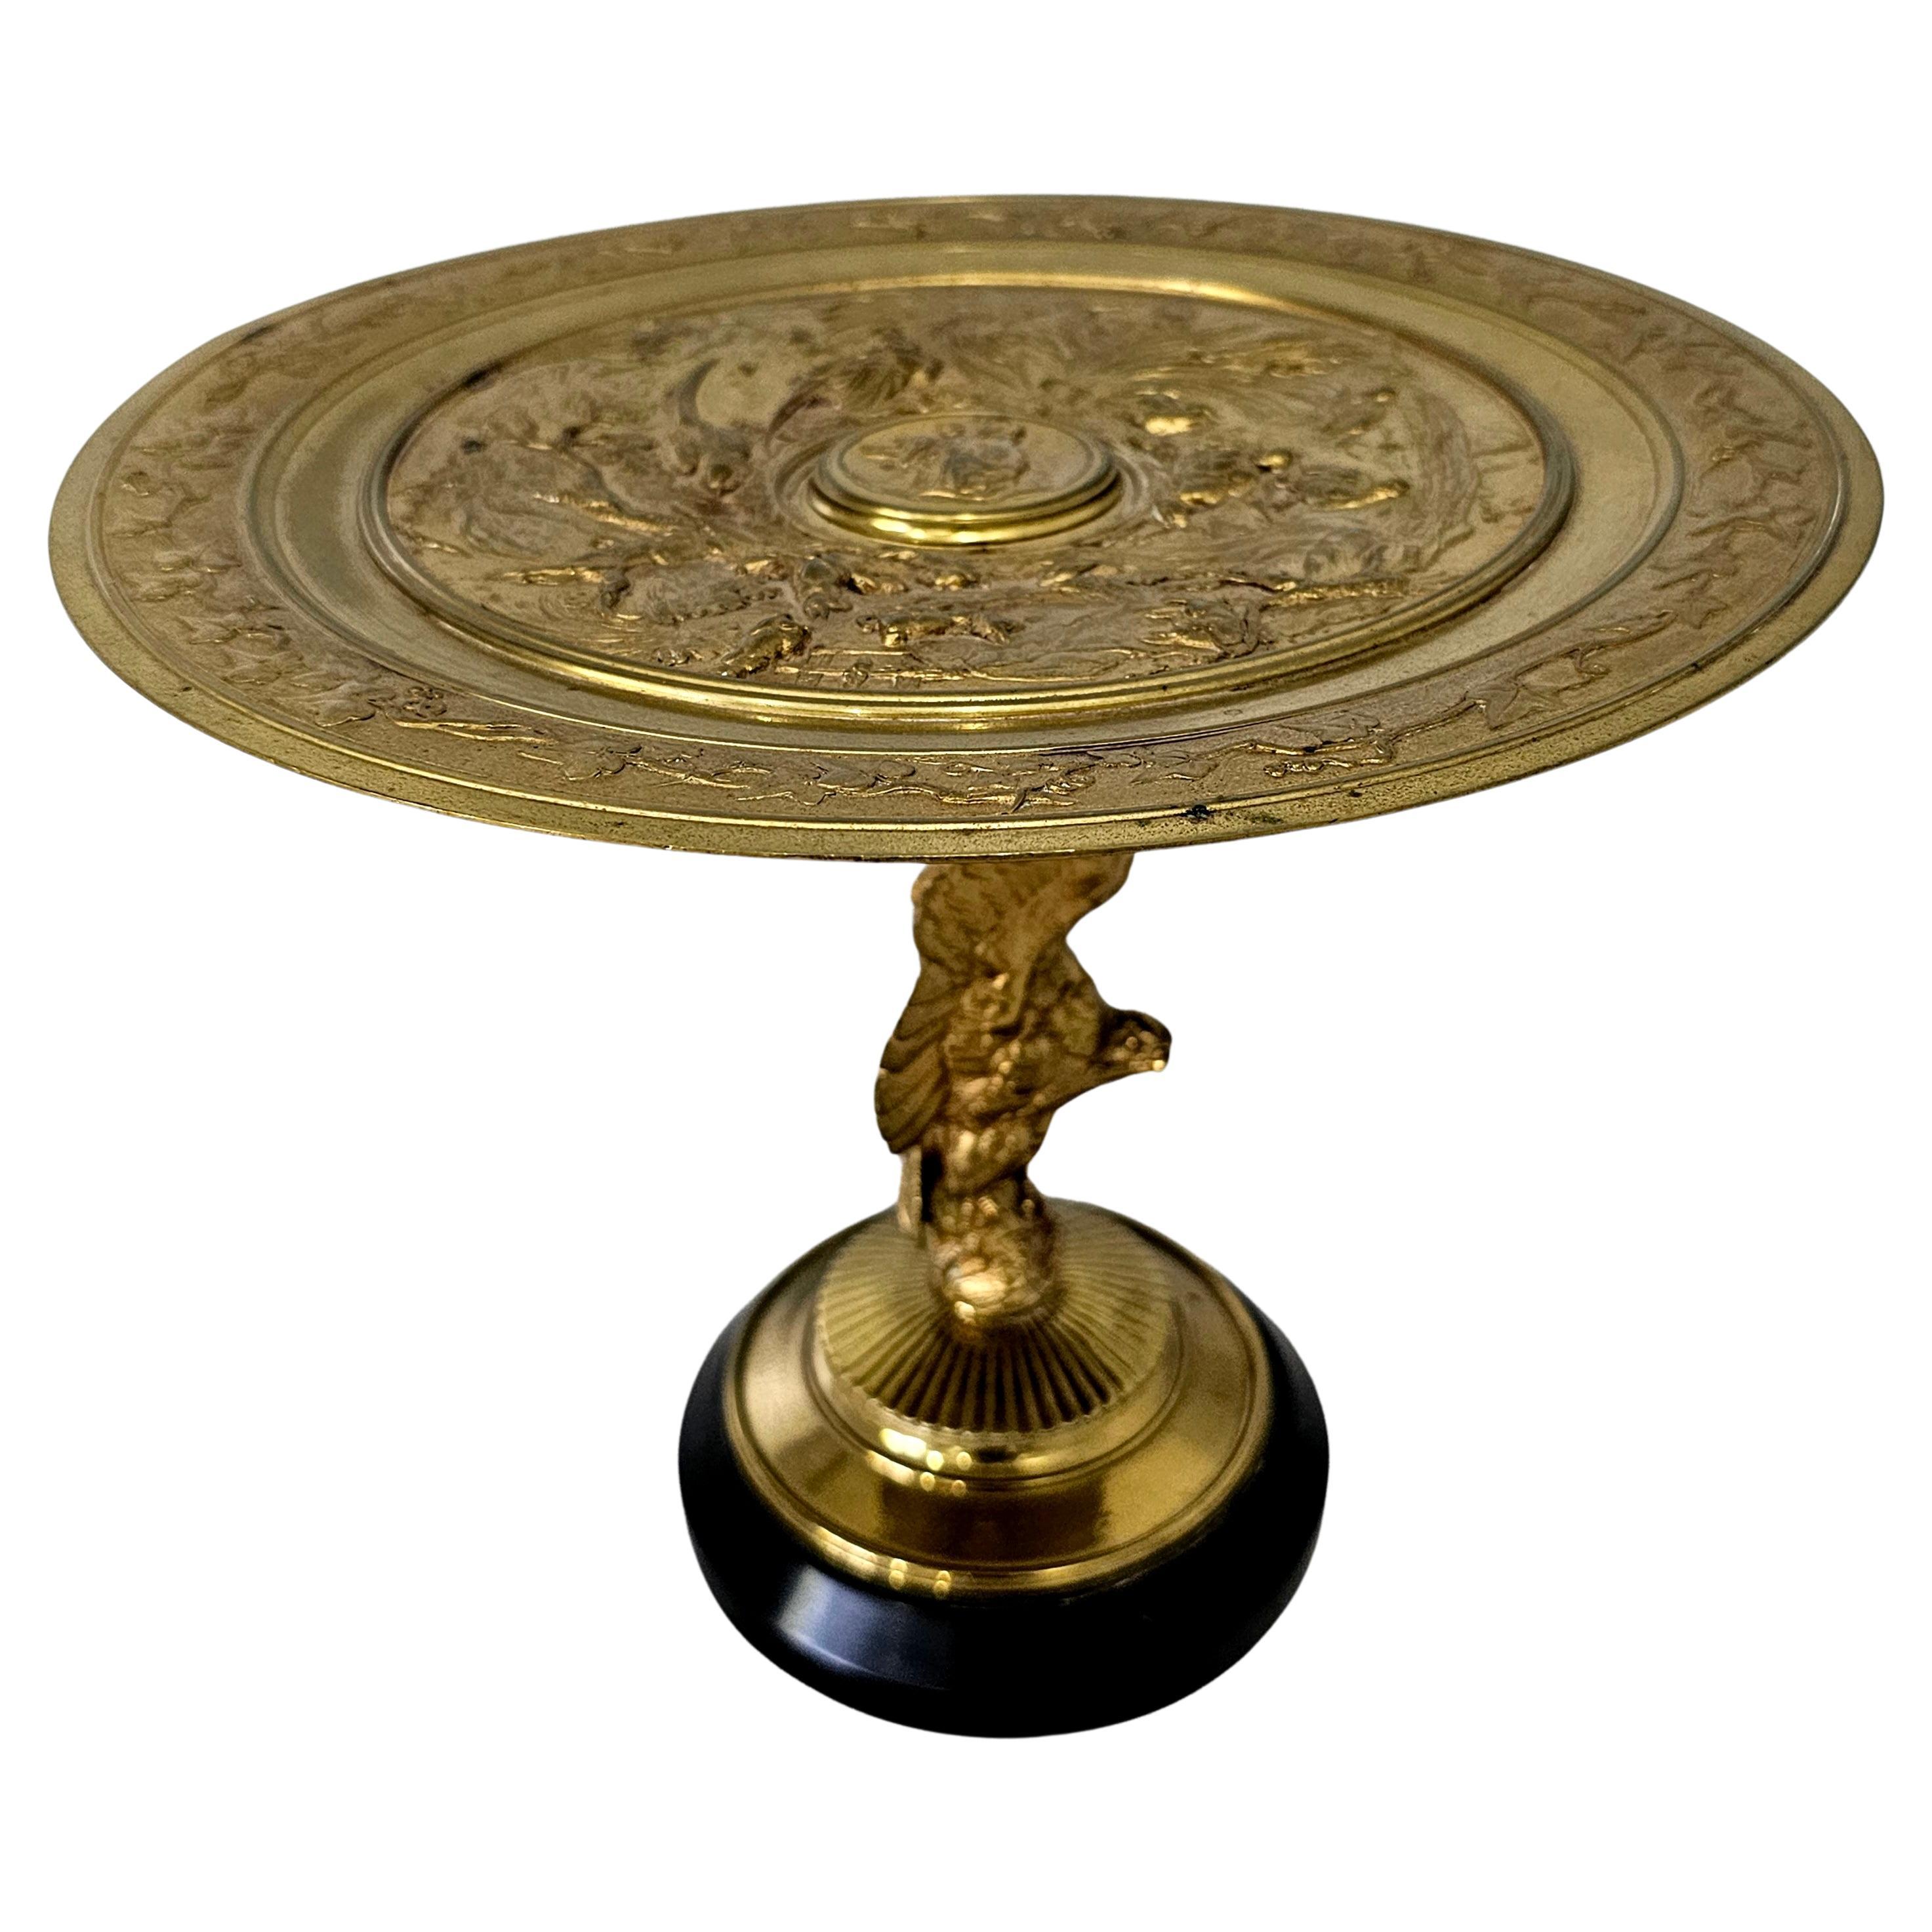 19th C. Renaissance Gilt Bronze Sculptural Tazza Signed E. Cana 1845-1895 French In Good Condition For Sale In Germantown, MD